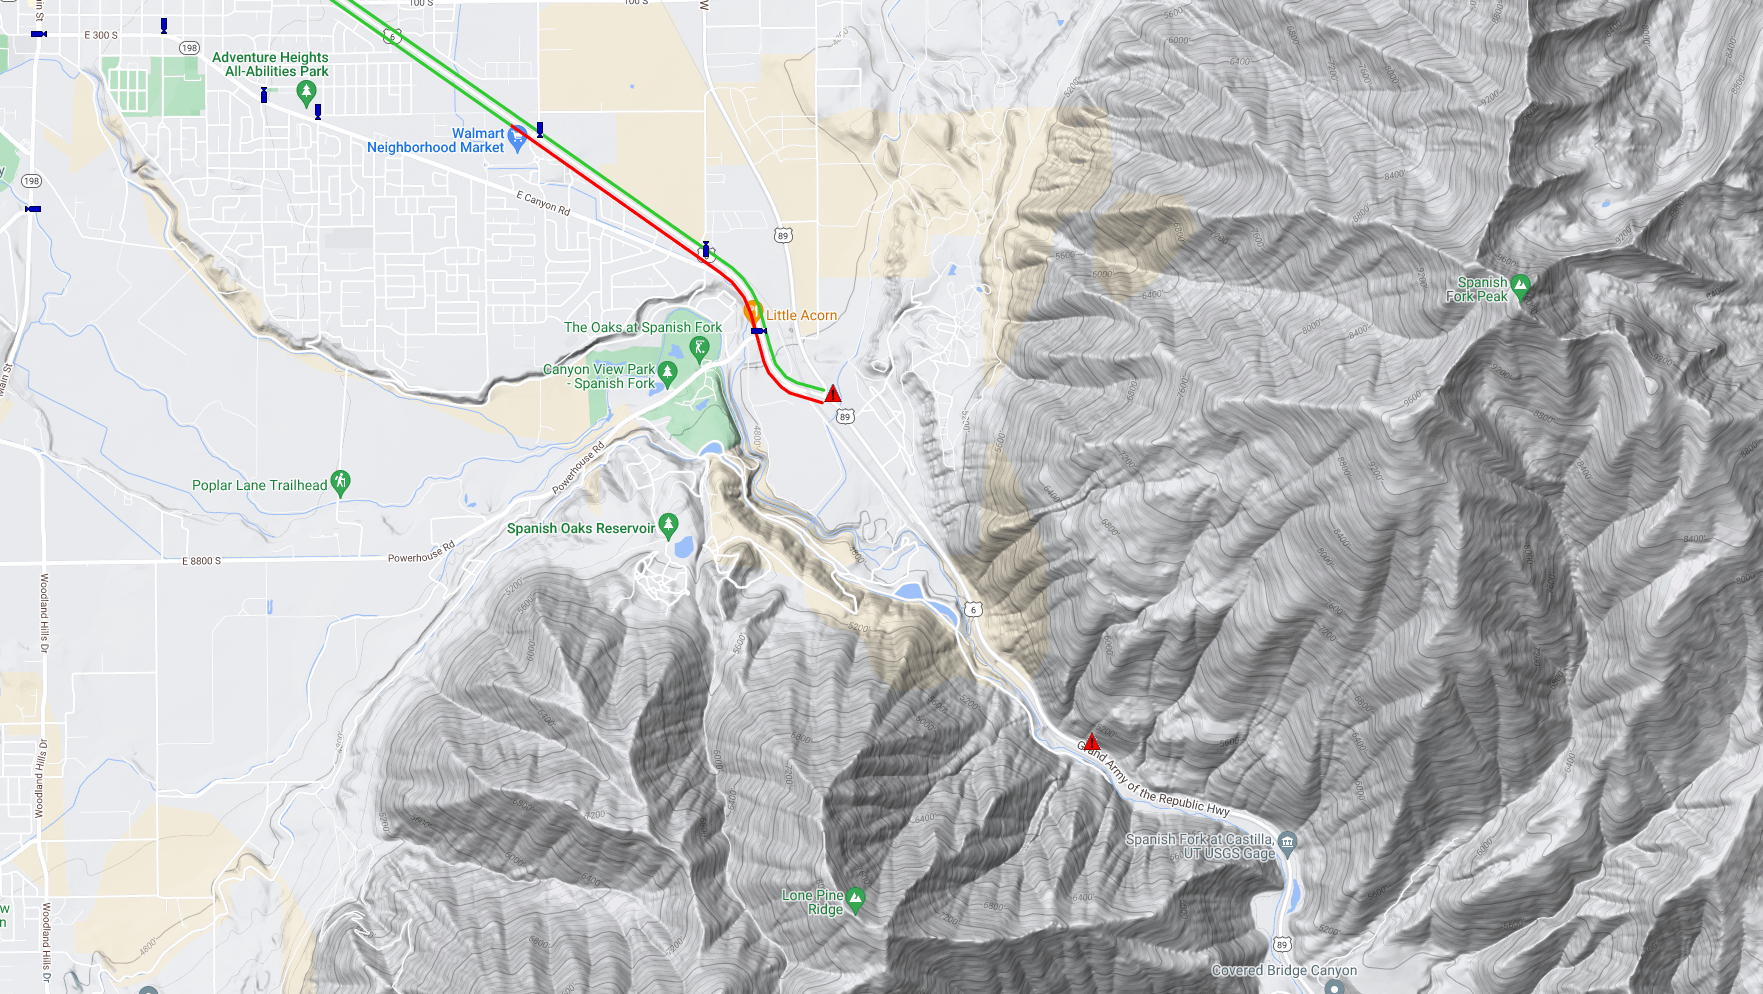 map of spanish fork canyon showing area of fatal crash...